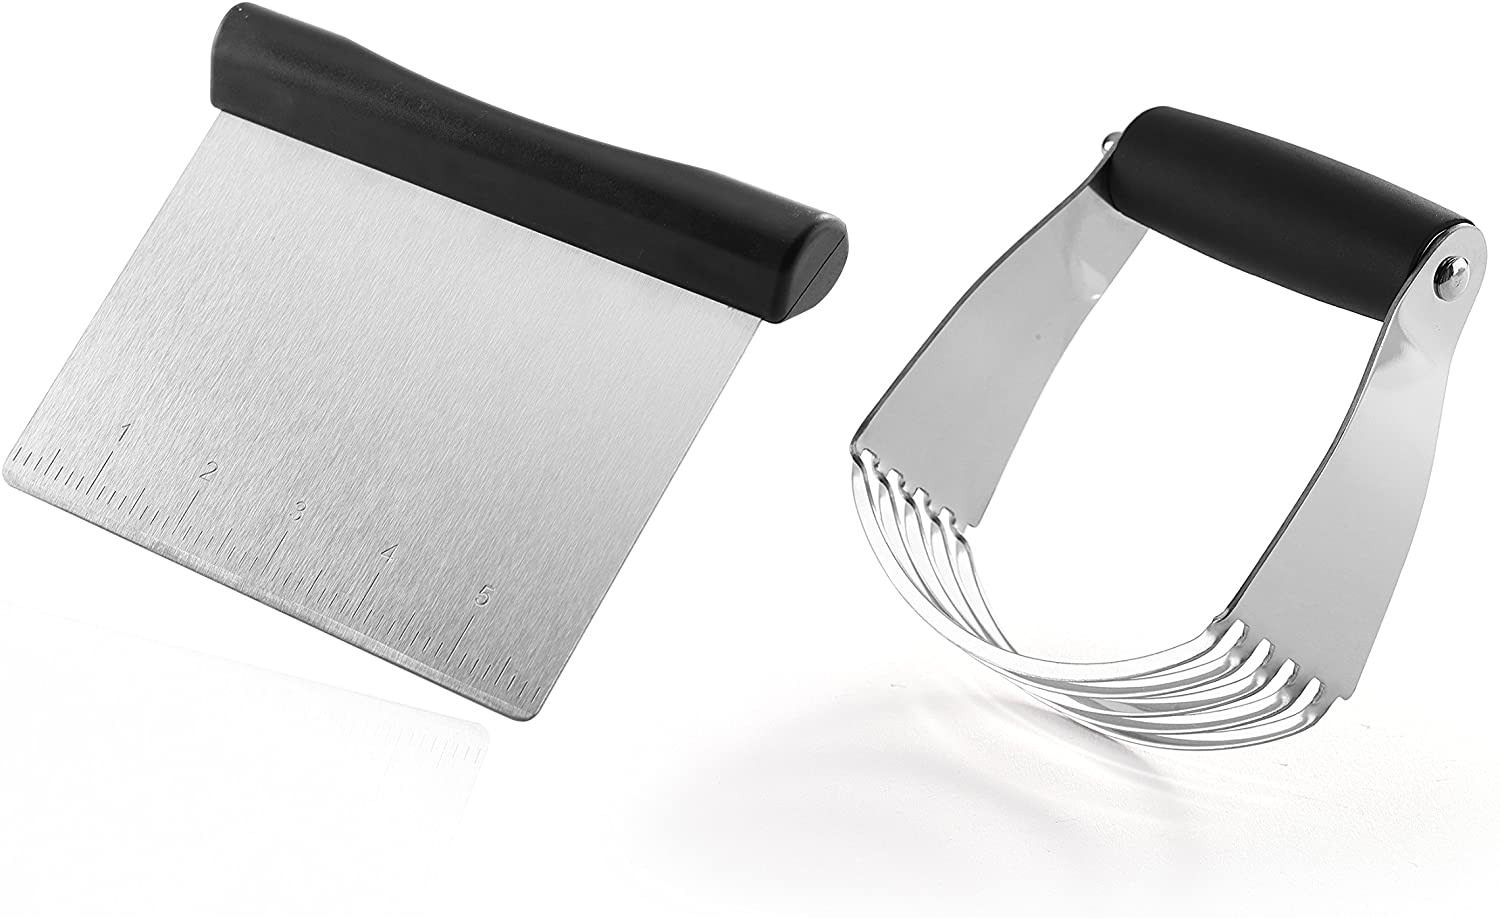  VERSAINSECT ter Dough Scraper Dough Cutter Scraper Tool Kitchen  Pastry Blender,Stainless Steel Pastry Cutters Heavy Duty Dough Cutter for  Kitchen Baking Tools,Comfortable and Dishwasher Safe (Black): Home & Kitchen